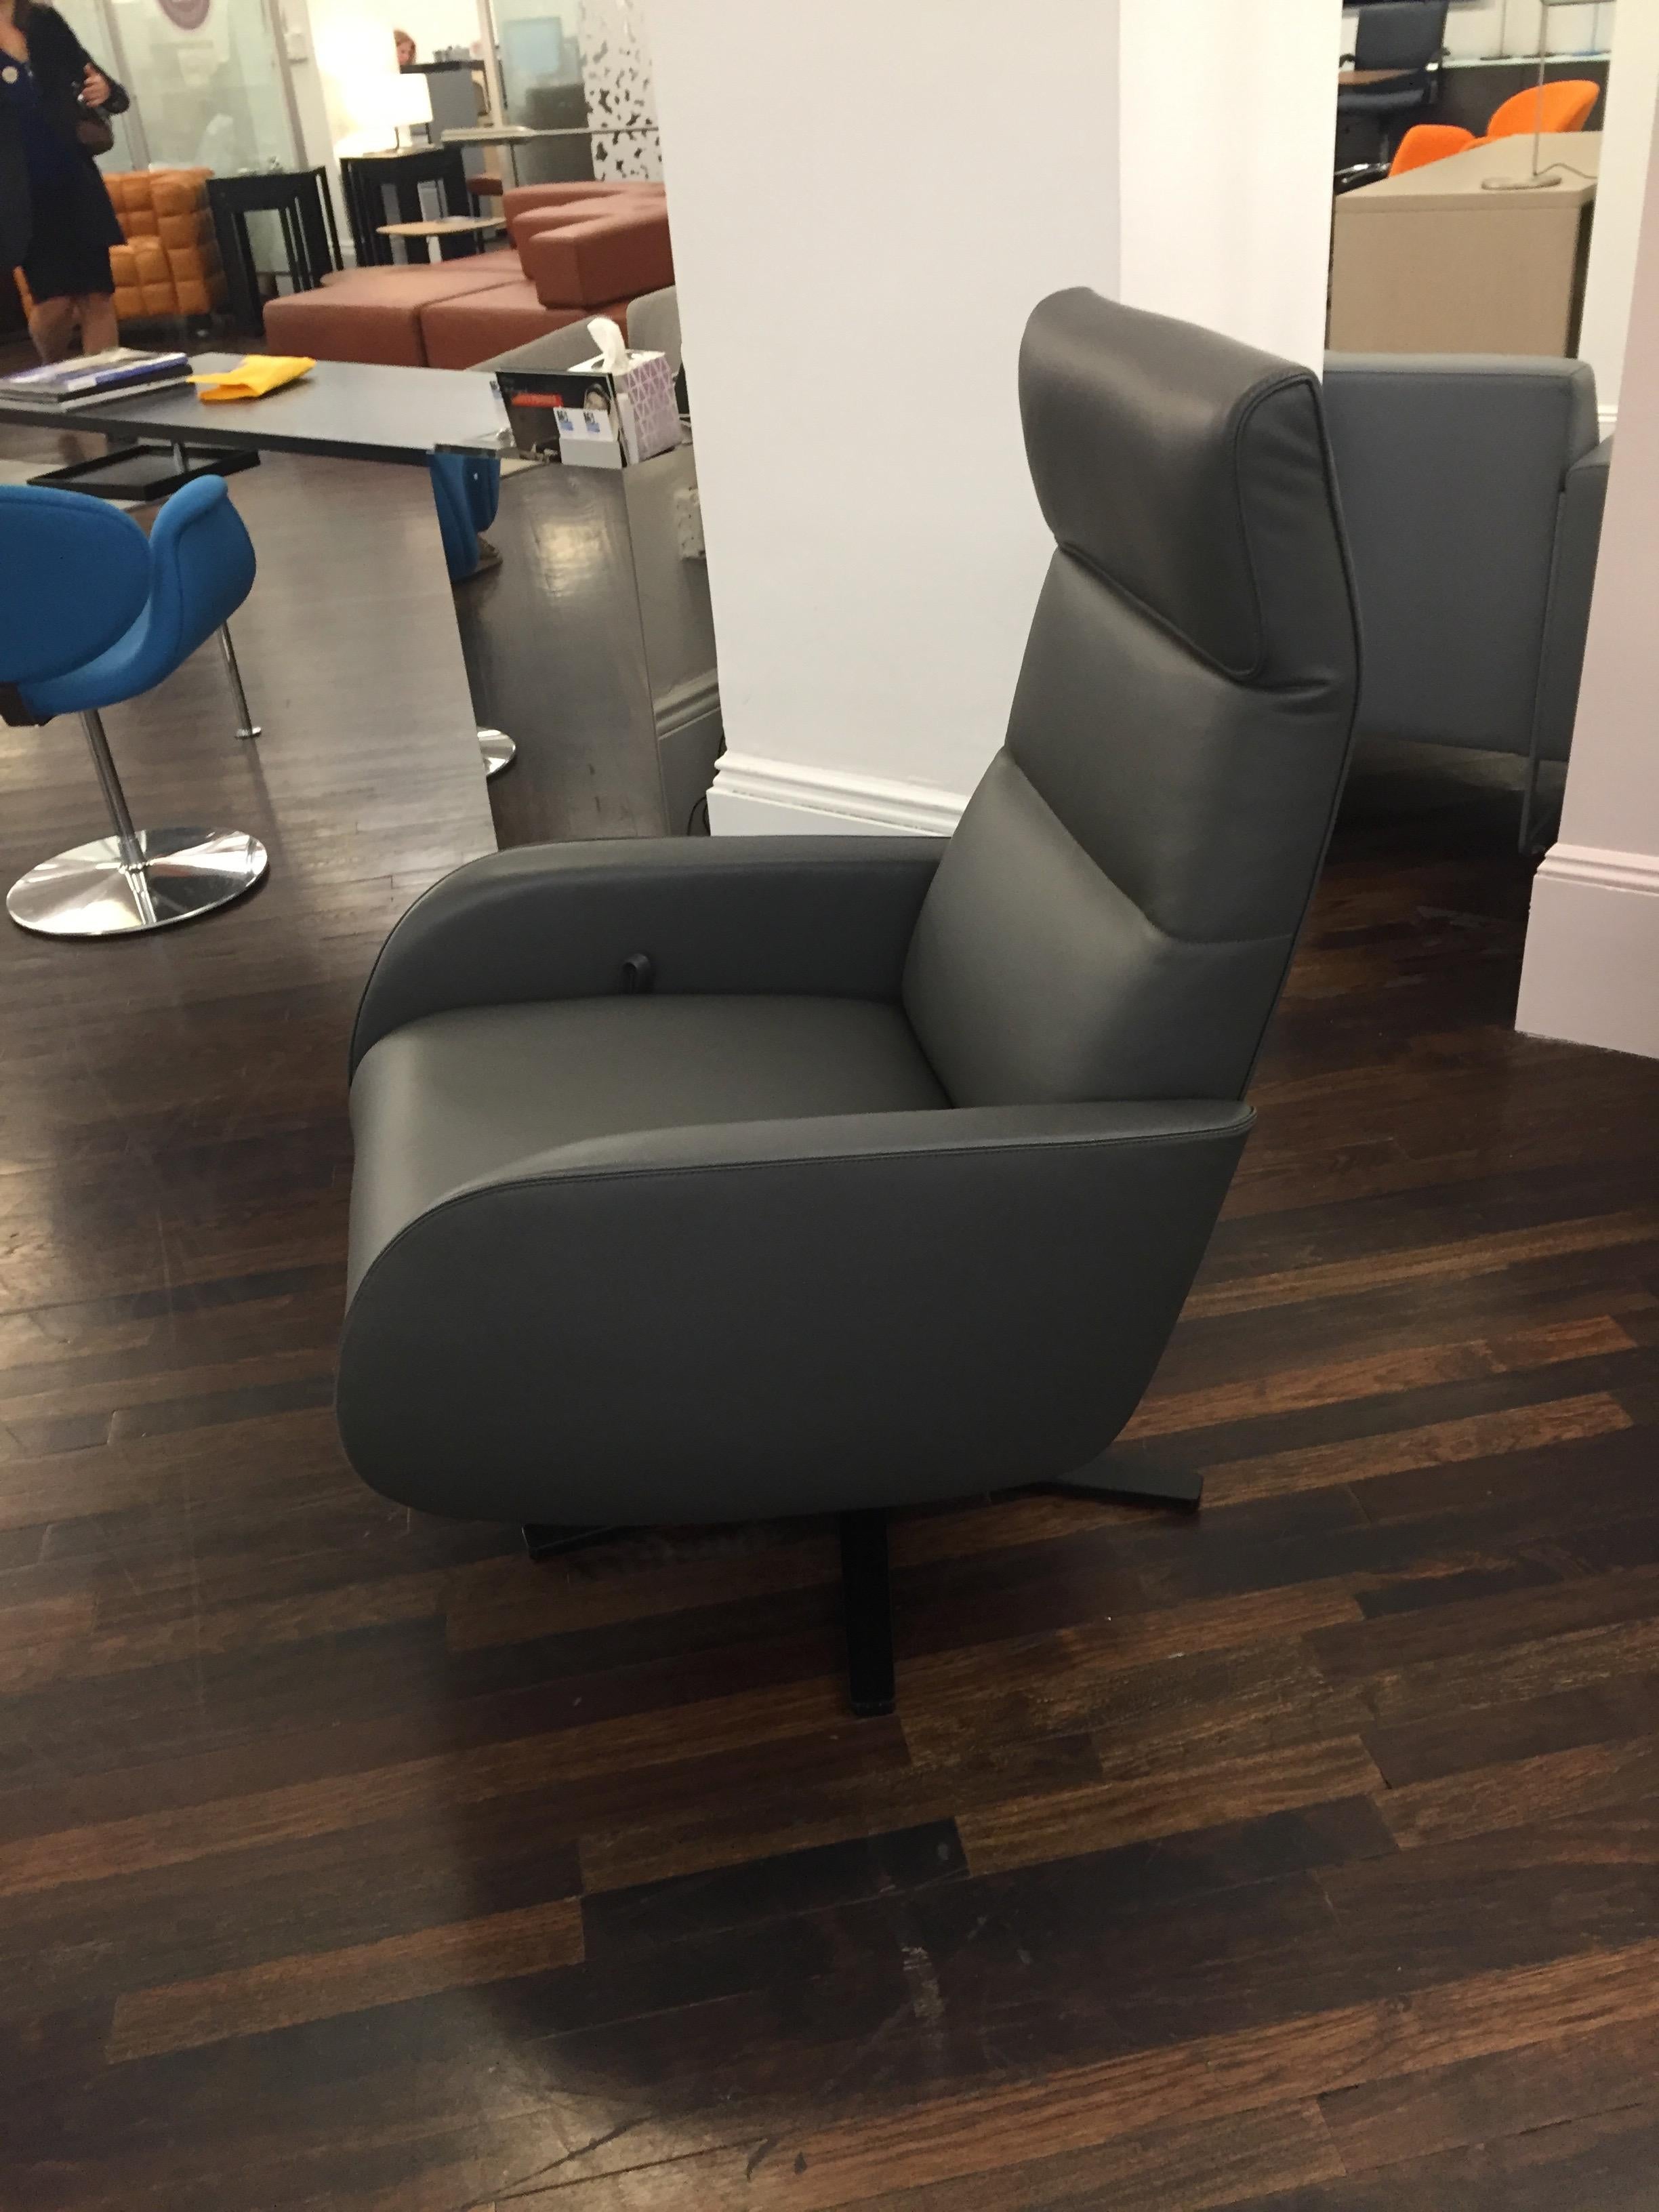 The clear form and reduced lines of the Spencer recliner is the perfect fusion of an appealing design and sophisticated functional demands. While the reclining angle changes, the body and armrests maintain an elegantly flowing whole. The footrest